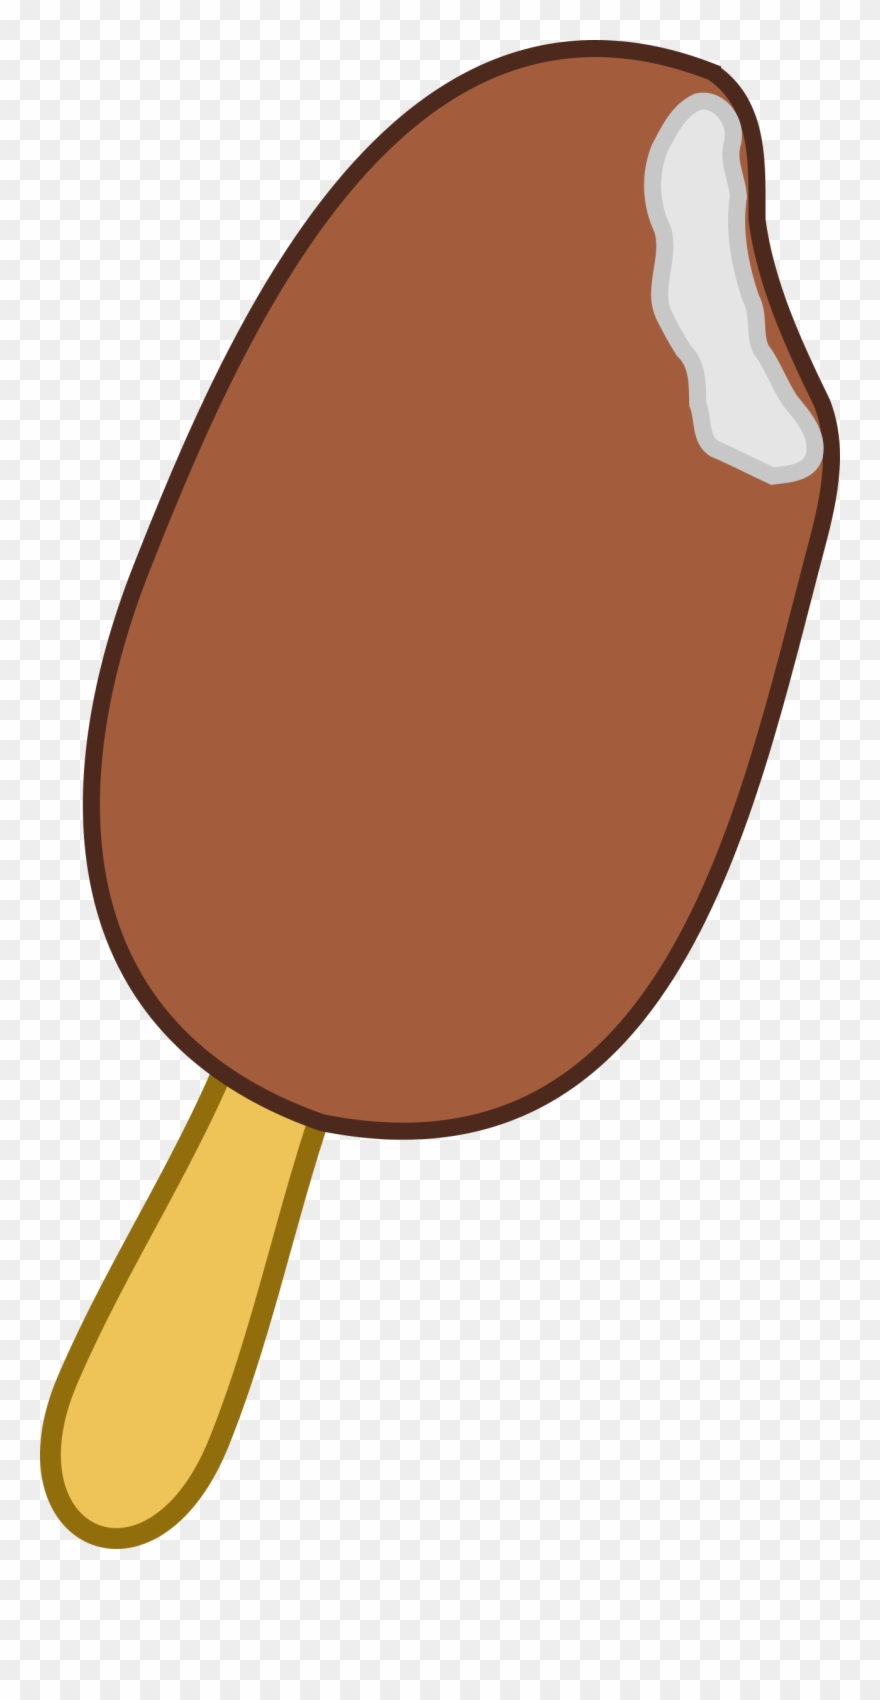 Popsicle Free To Use Clip Art.